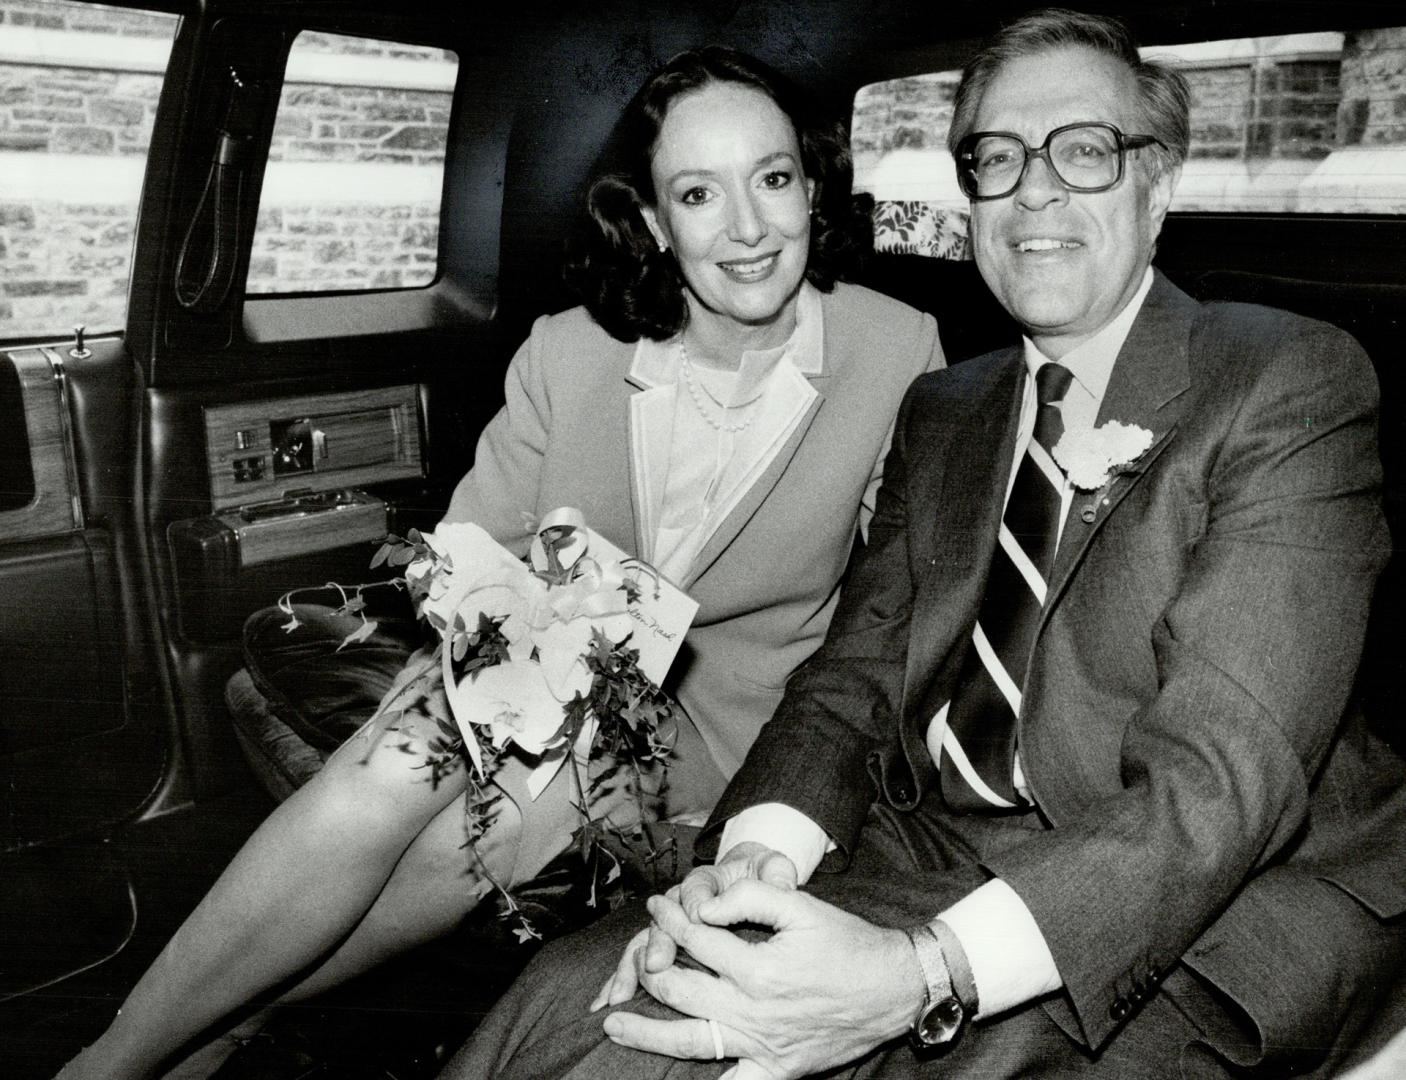 News flash, The National's Knowlton Nash and ex-dancer Lorraine Thomson, another CBC veteran, sit in a limousine after they were married in a quiet ce(...)